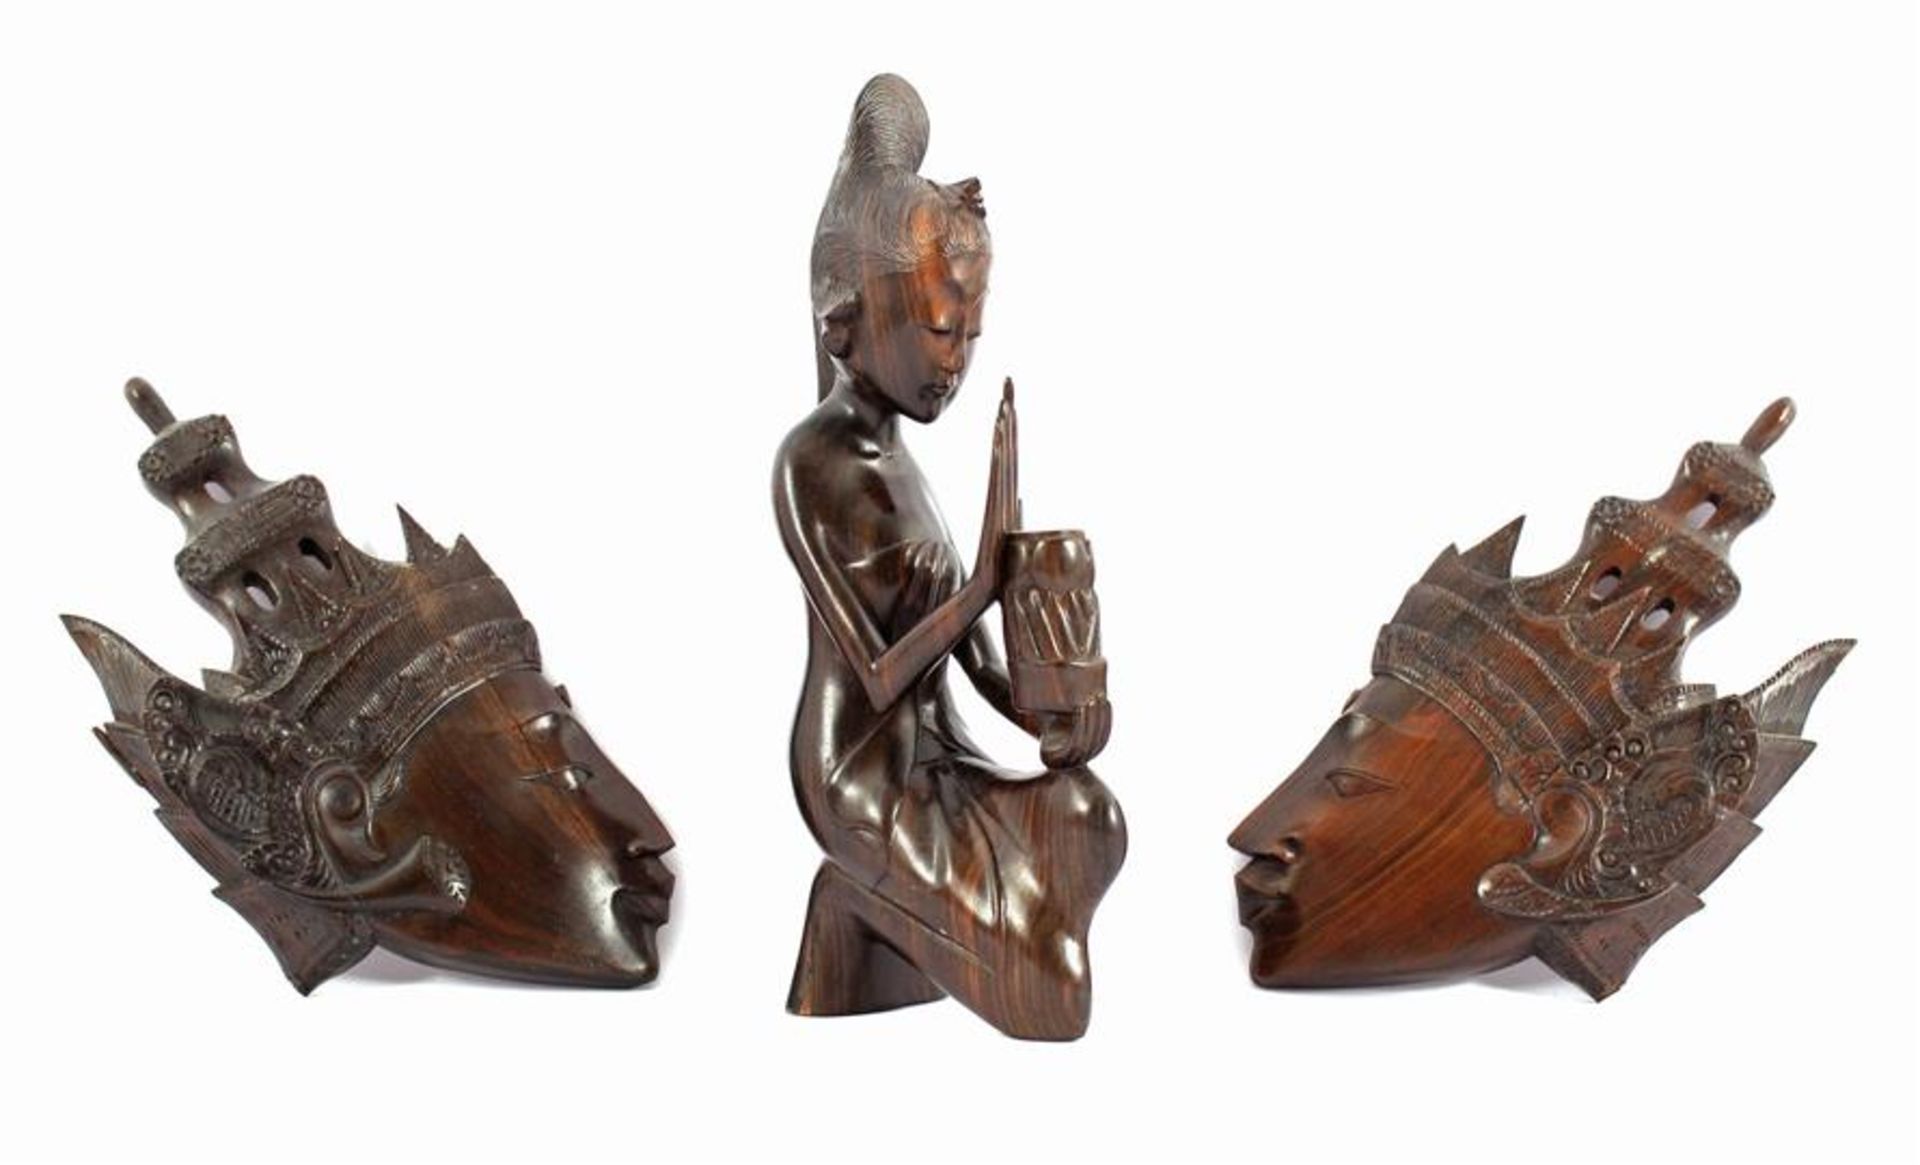 Indian coromandel wood bombarded statue of a woman 25 cm high and 2 Balinese masks 23.5 cm high